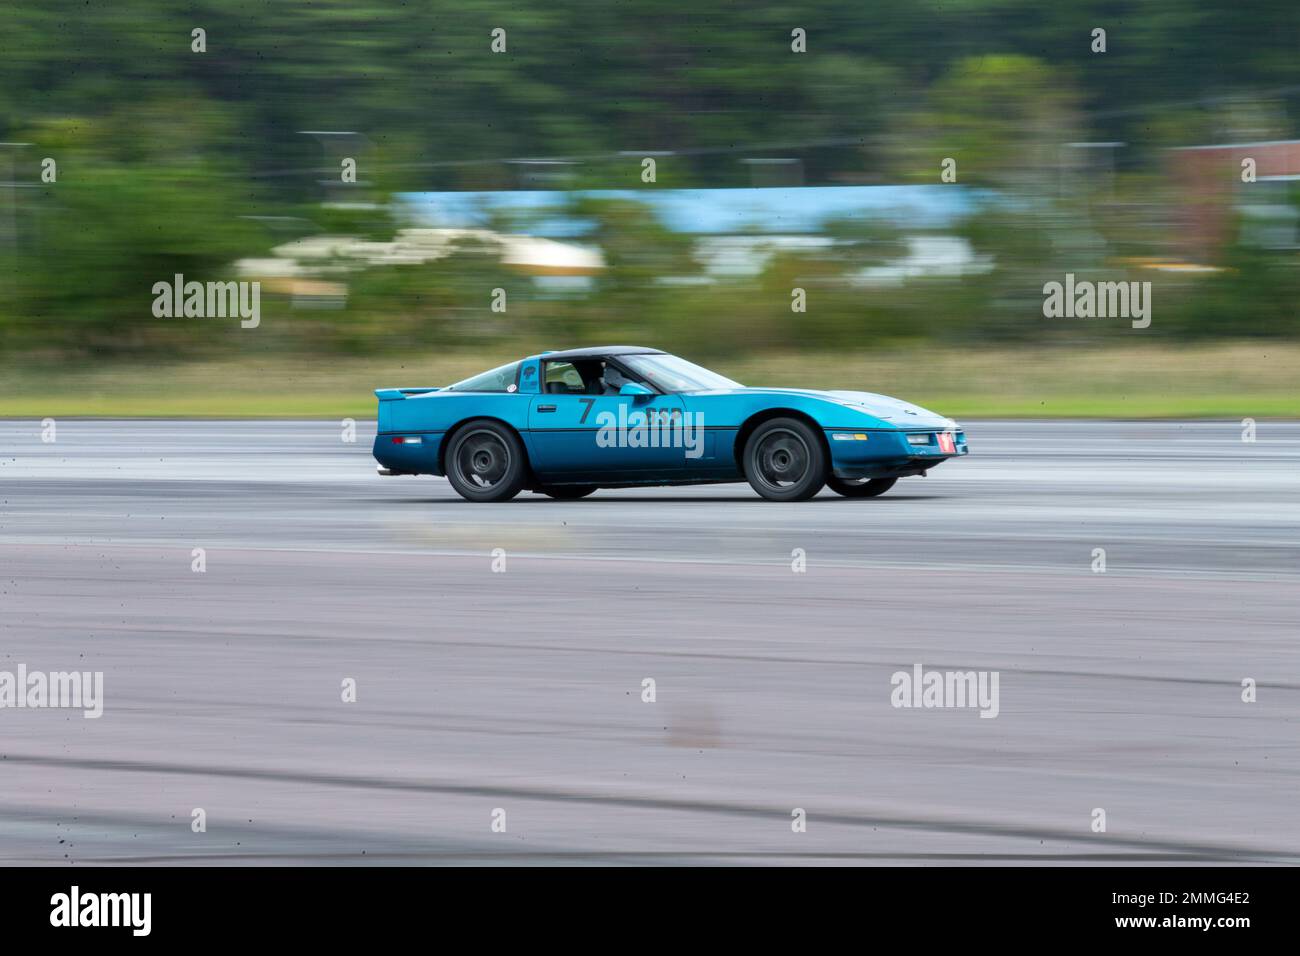 A participant races his 1987 Chevrolet Corvette down the Autocross course at Marine Corps Air Station Cherry Point, North Carolina, Sep. 17, 2022. The Sports Car Club of America and the Single Marine Program hosted Autocross, a car-controlled event where participants race for the fastest time in their given vehicle class. Stock Photo